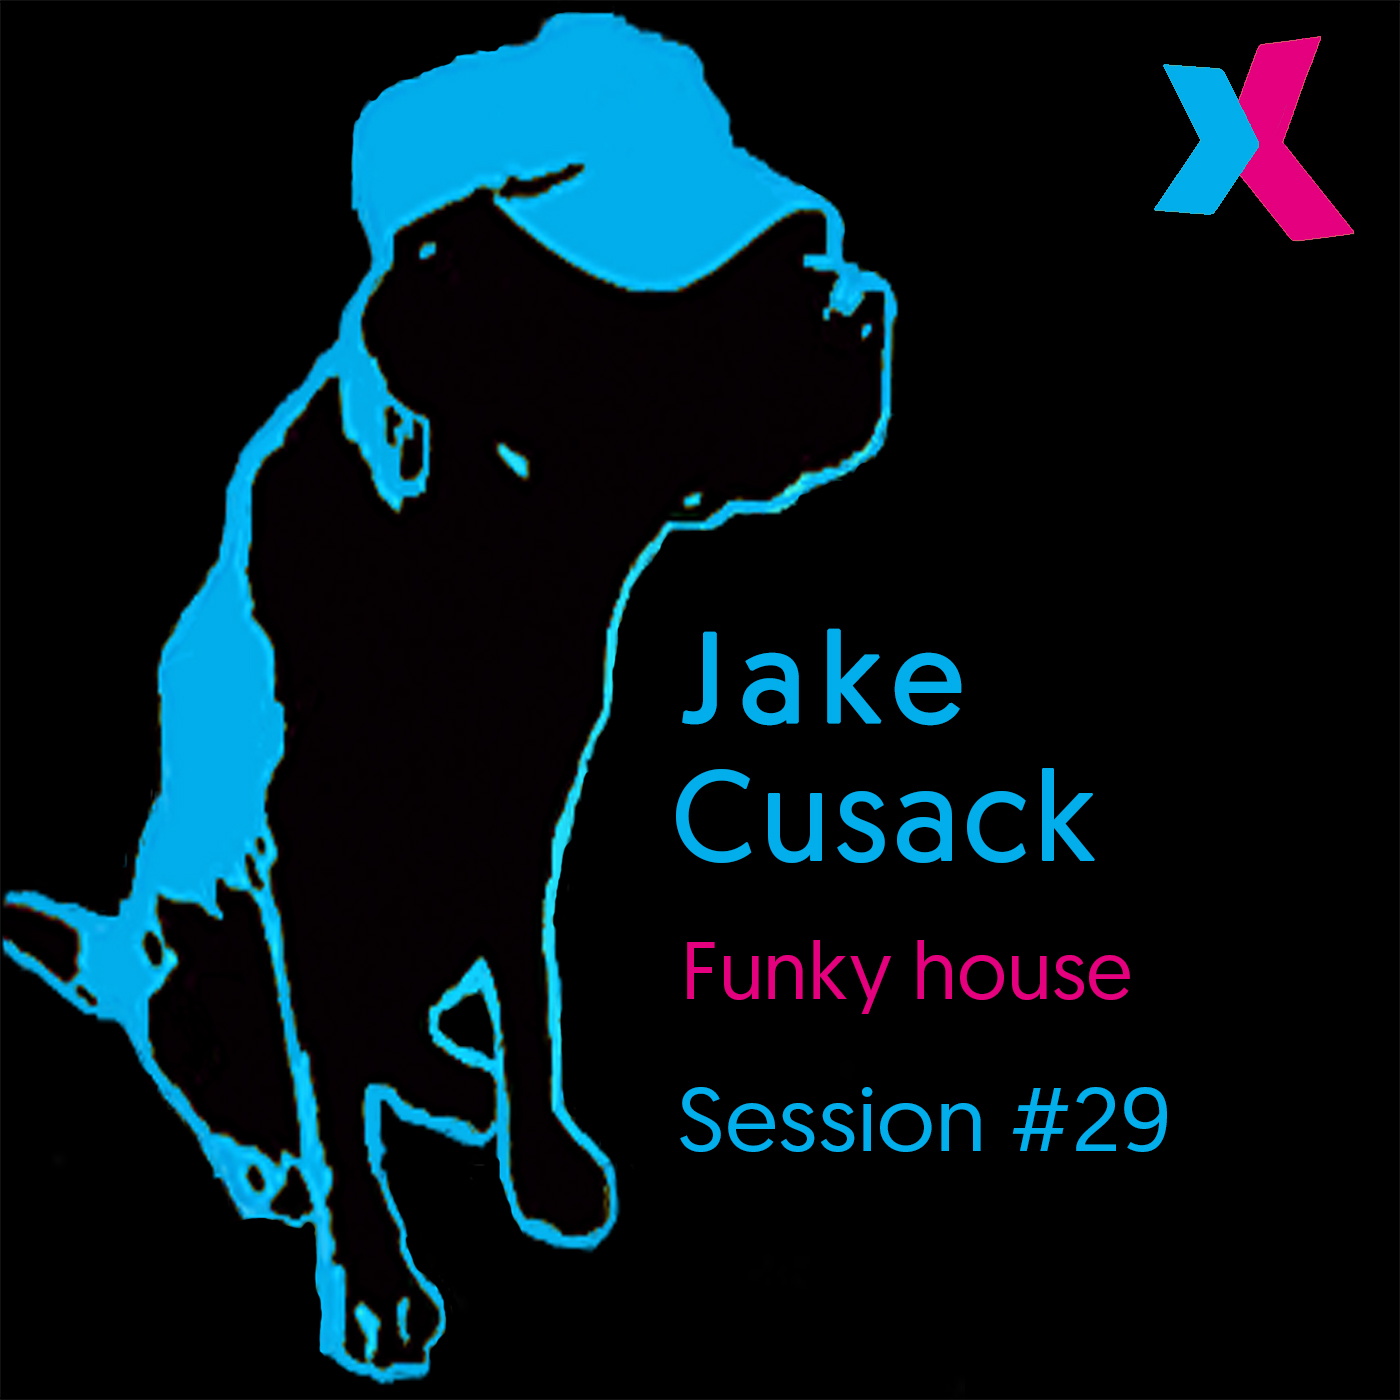 Jake Cusack - Funky house - October - Session 29